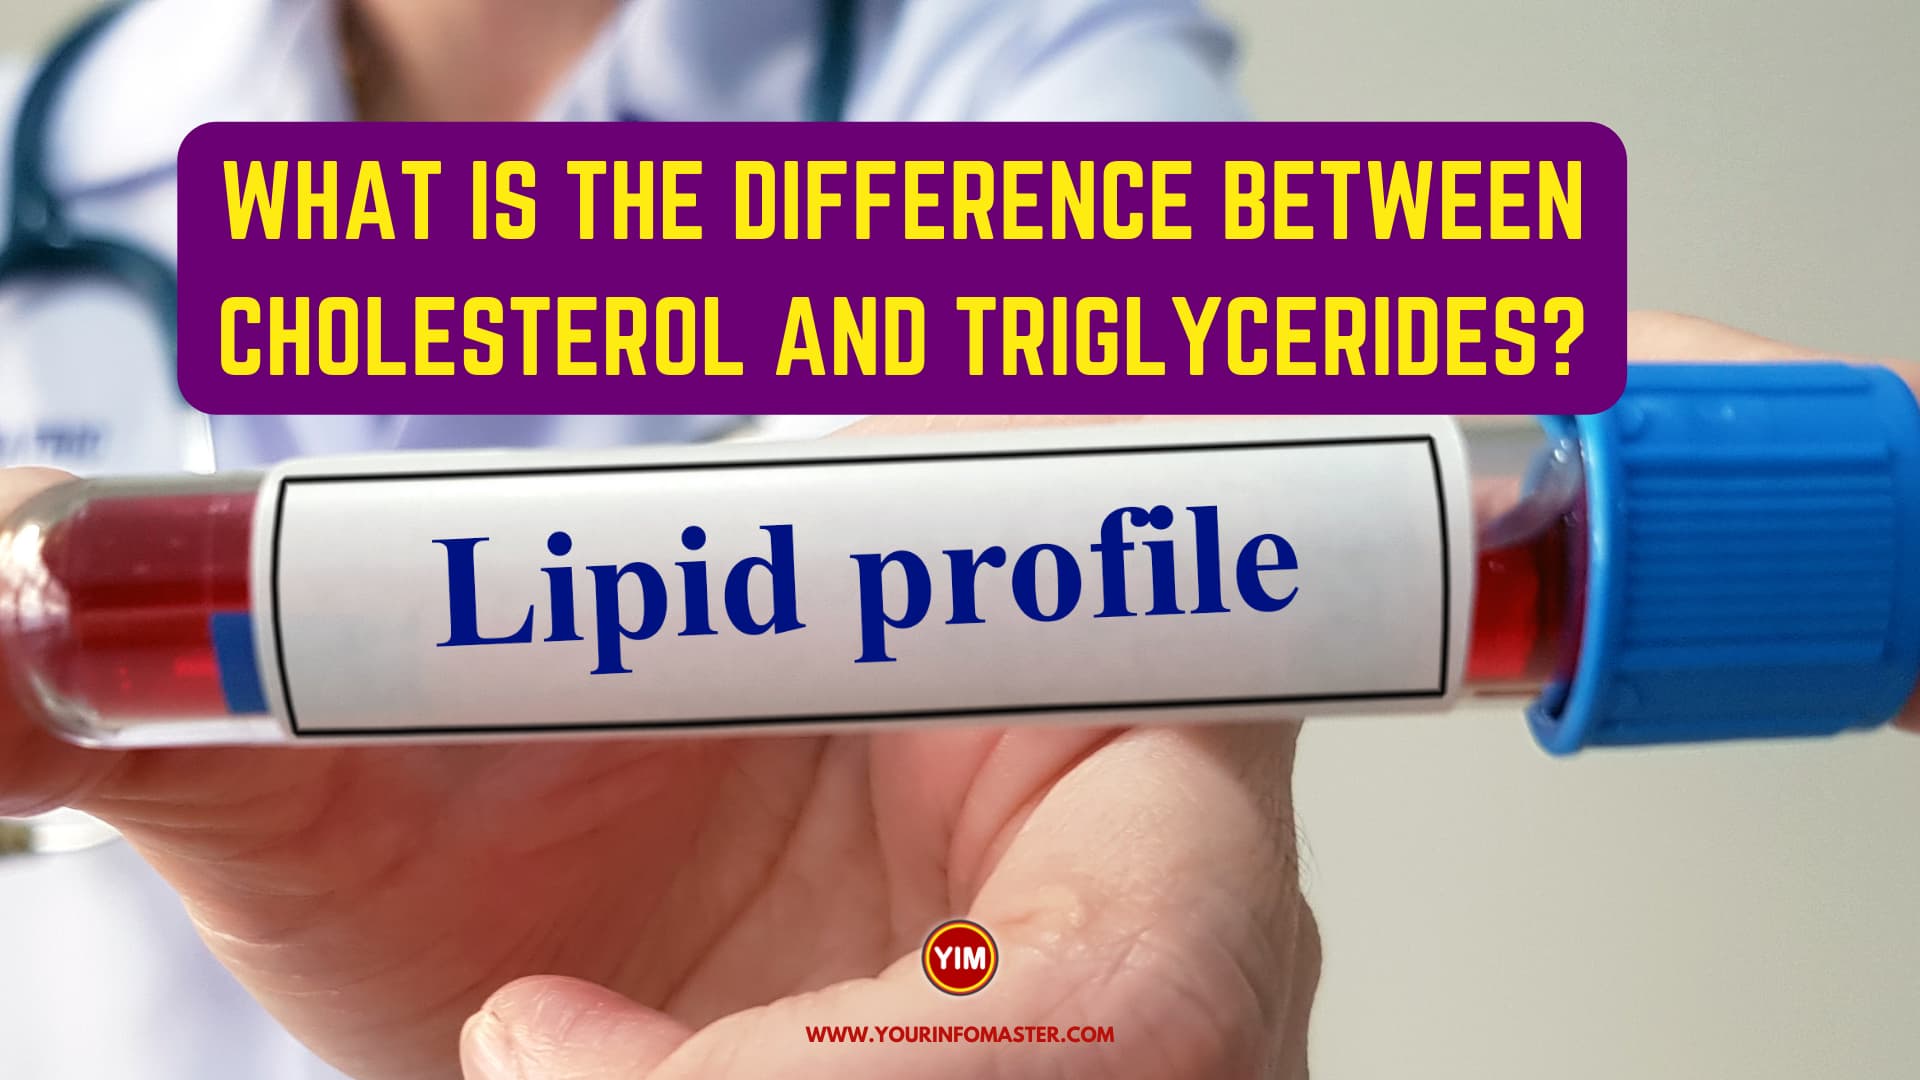 What is the difference between Cholesterol and Triglycerides